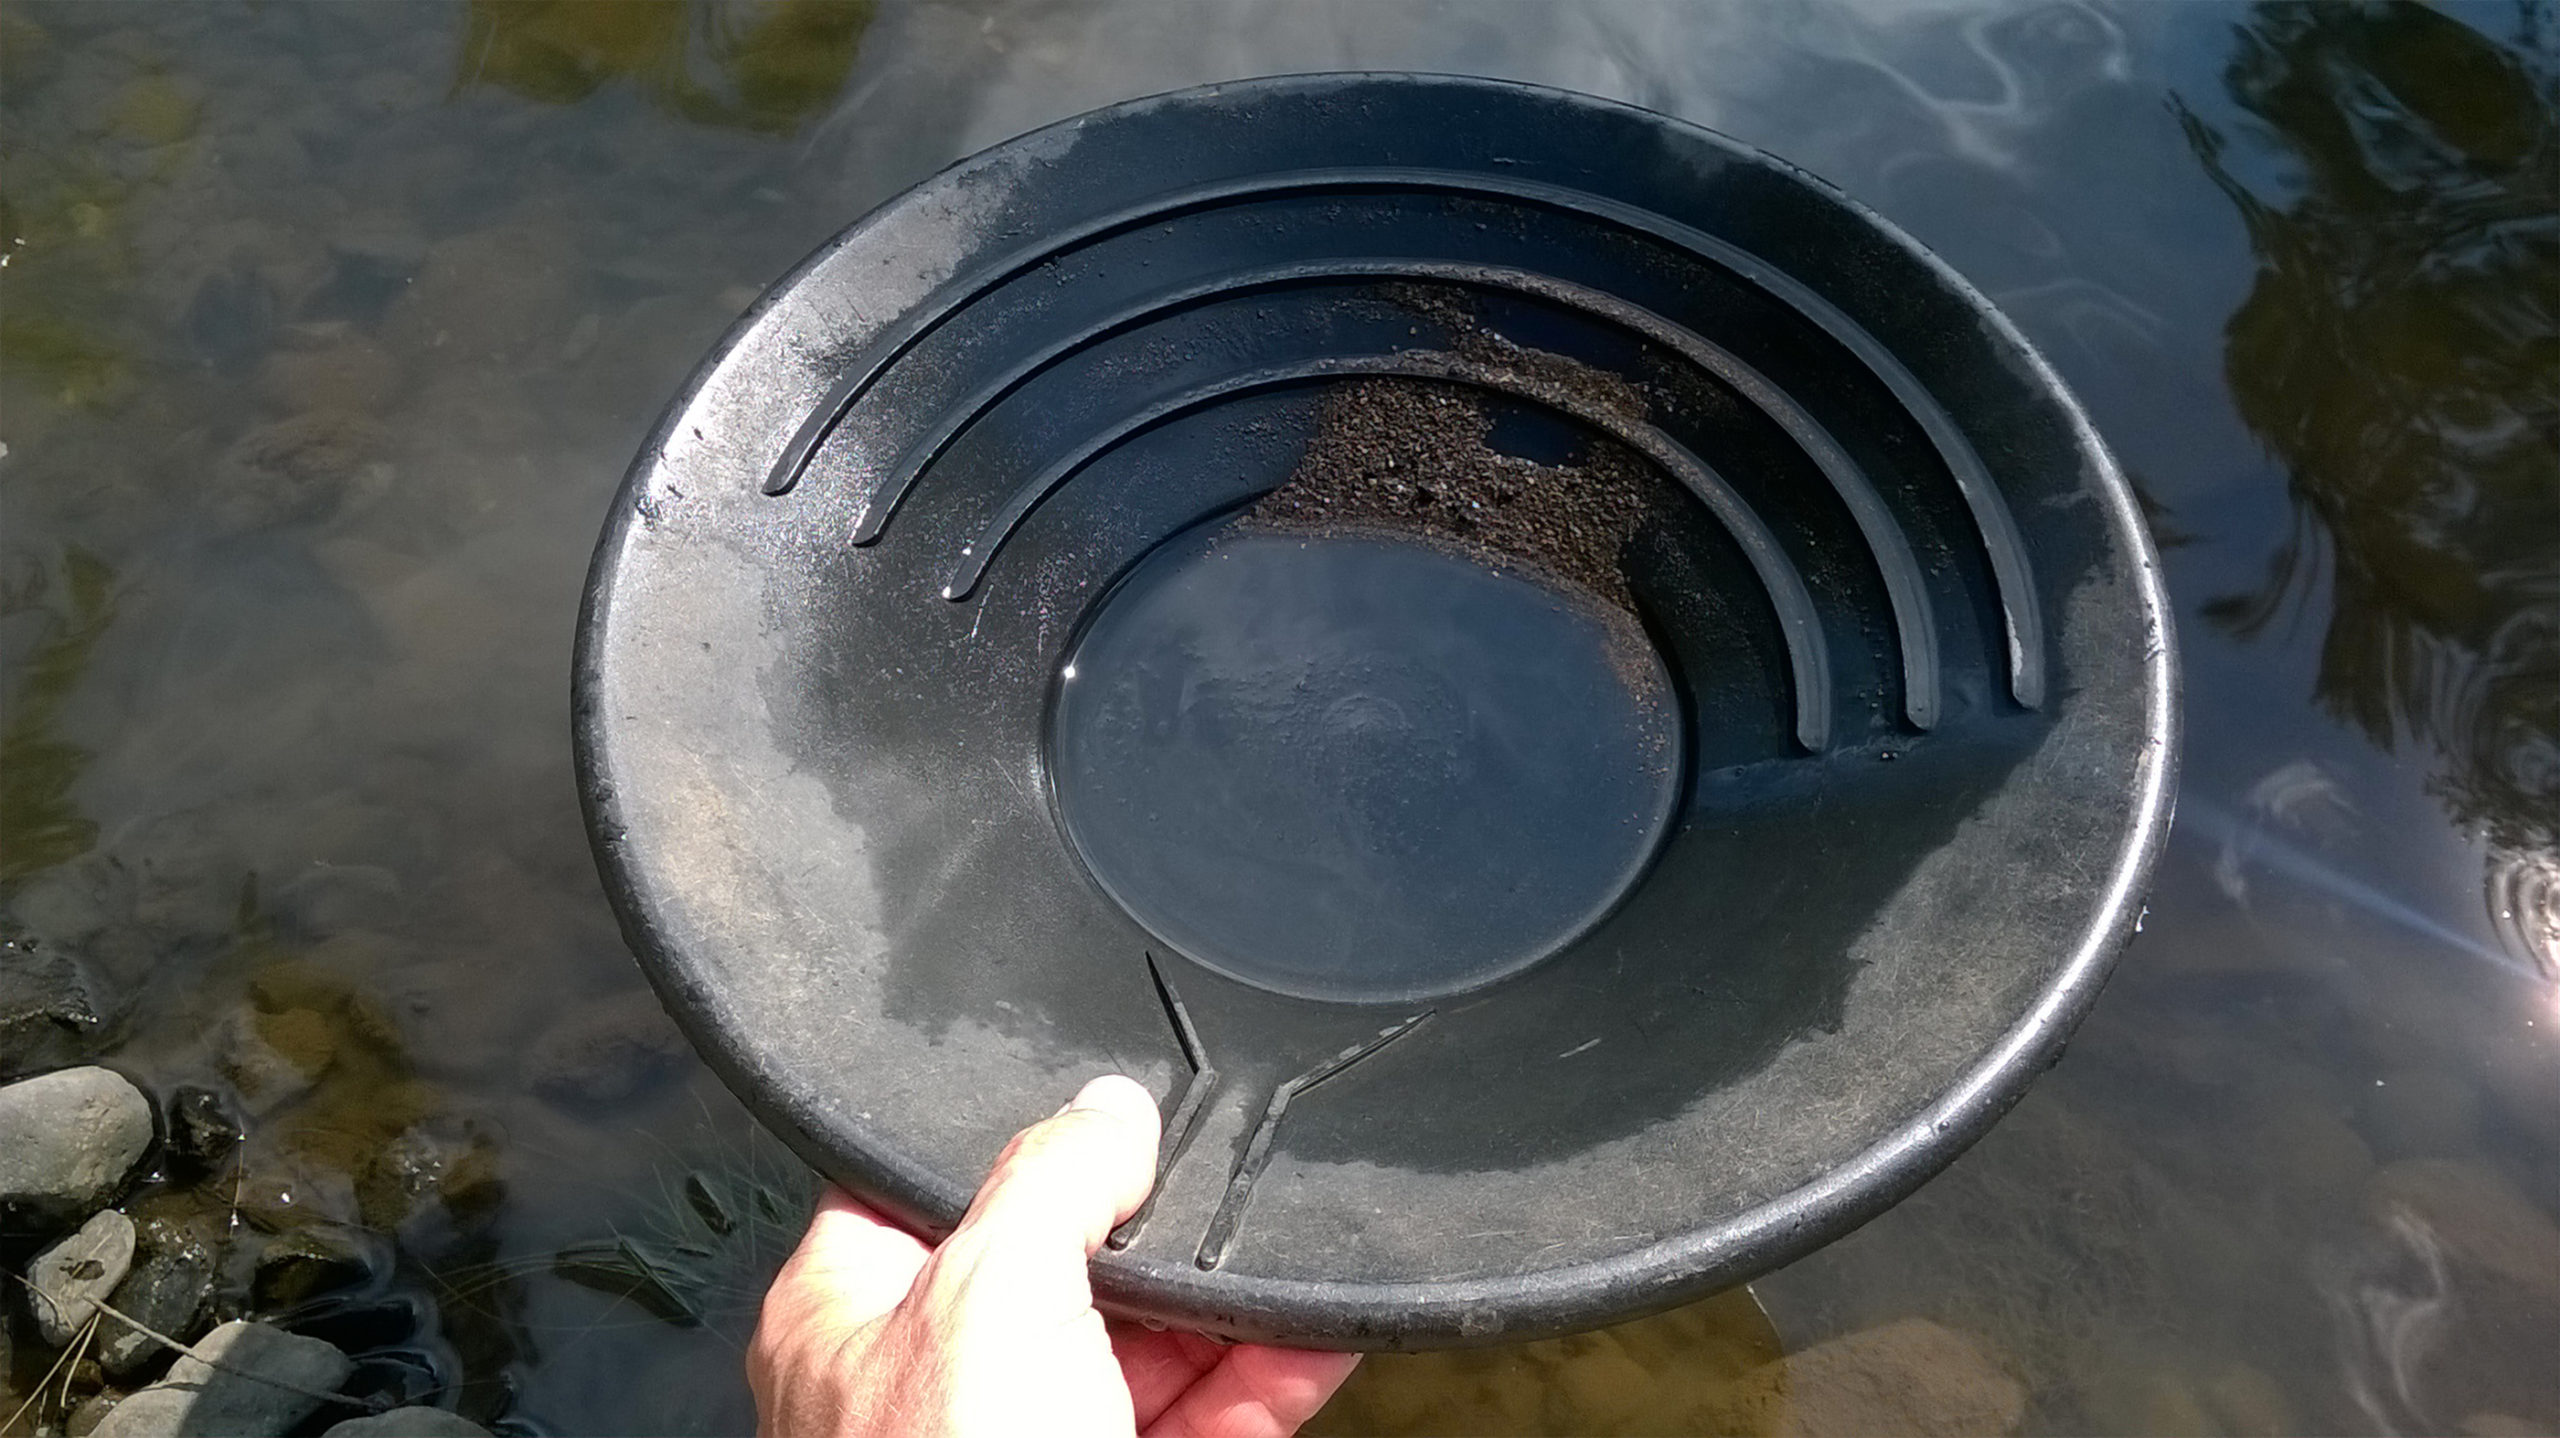 Gold pan with fine sediment and some fine gold